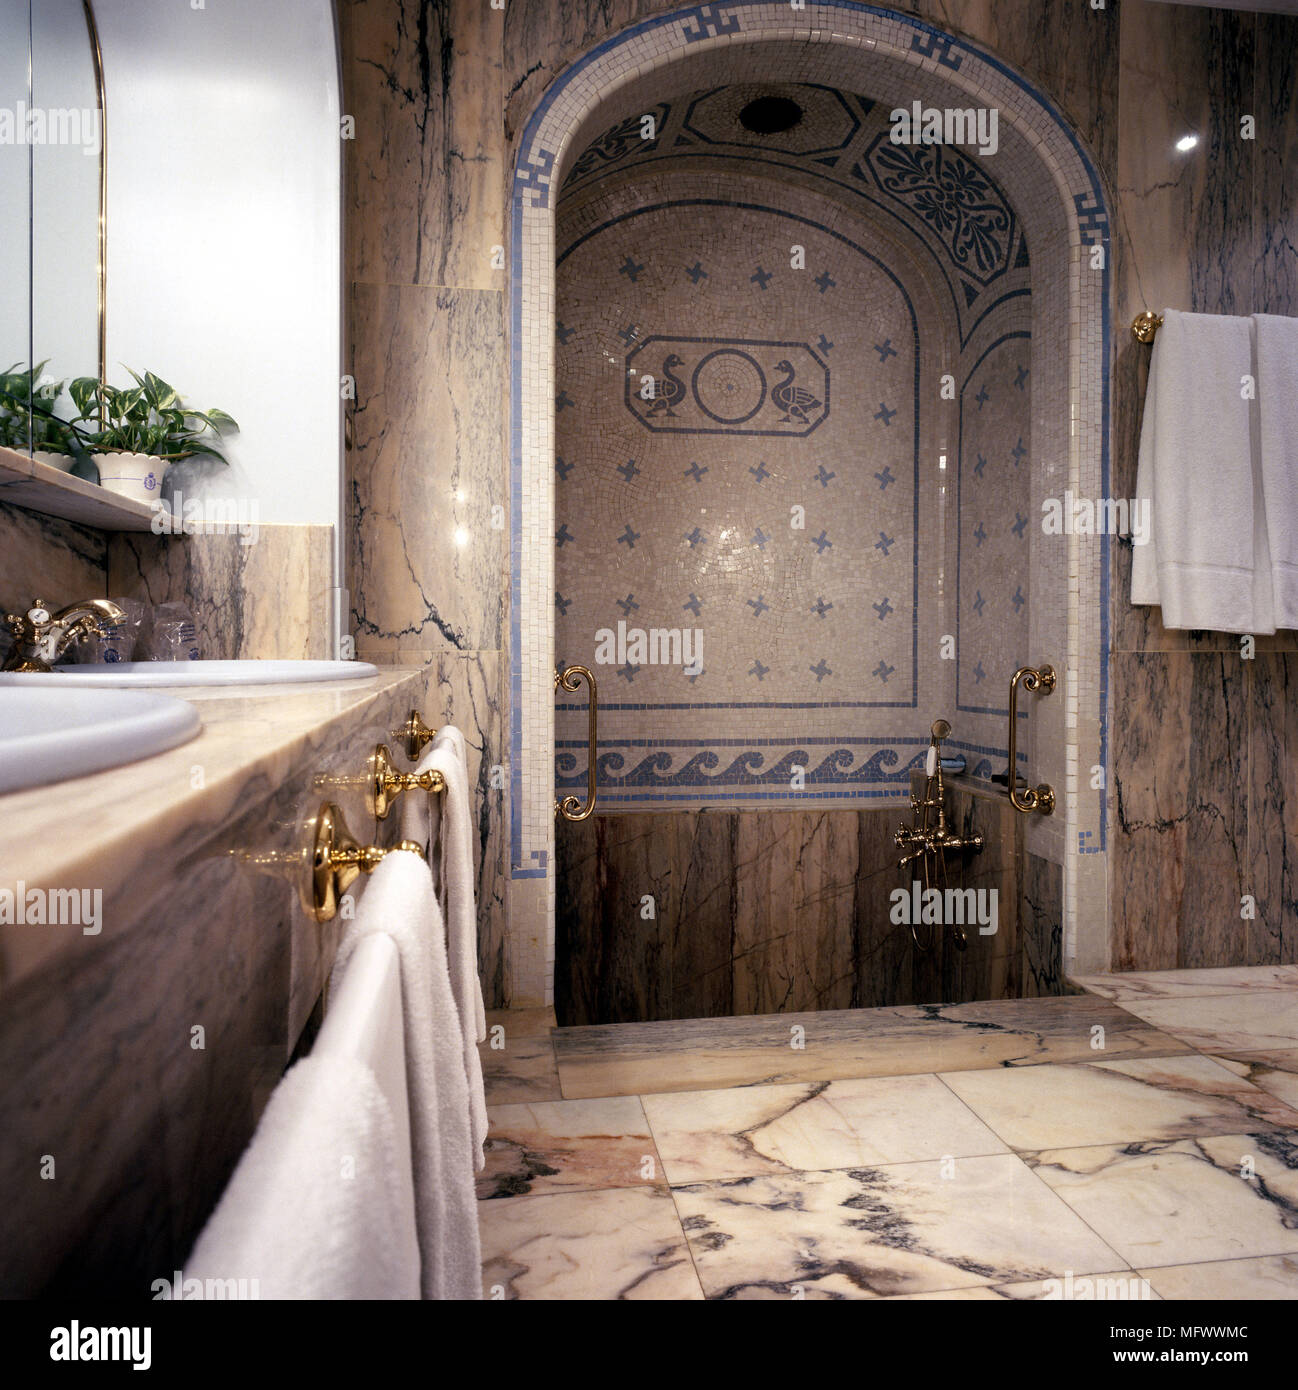 View of a well designed shower stall in a bathroom Stock Photo